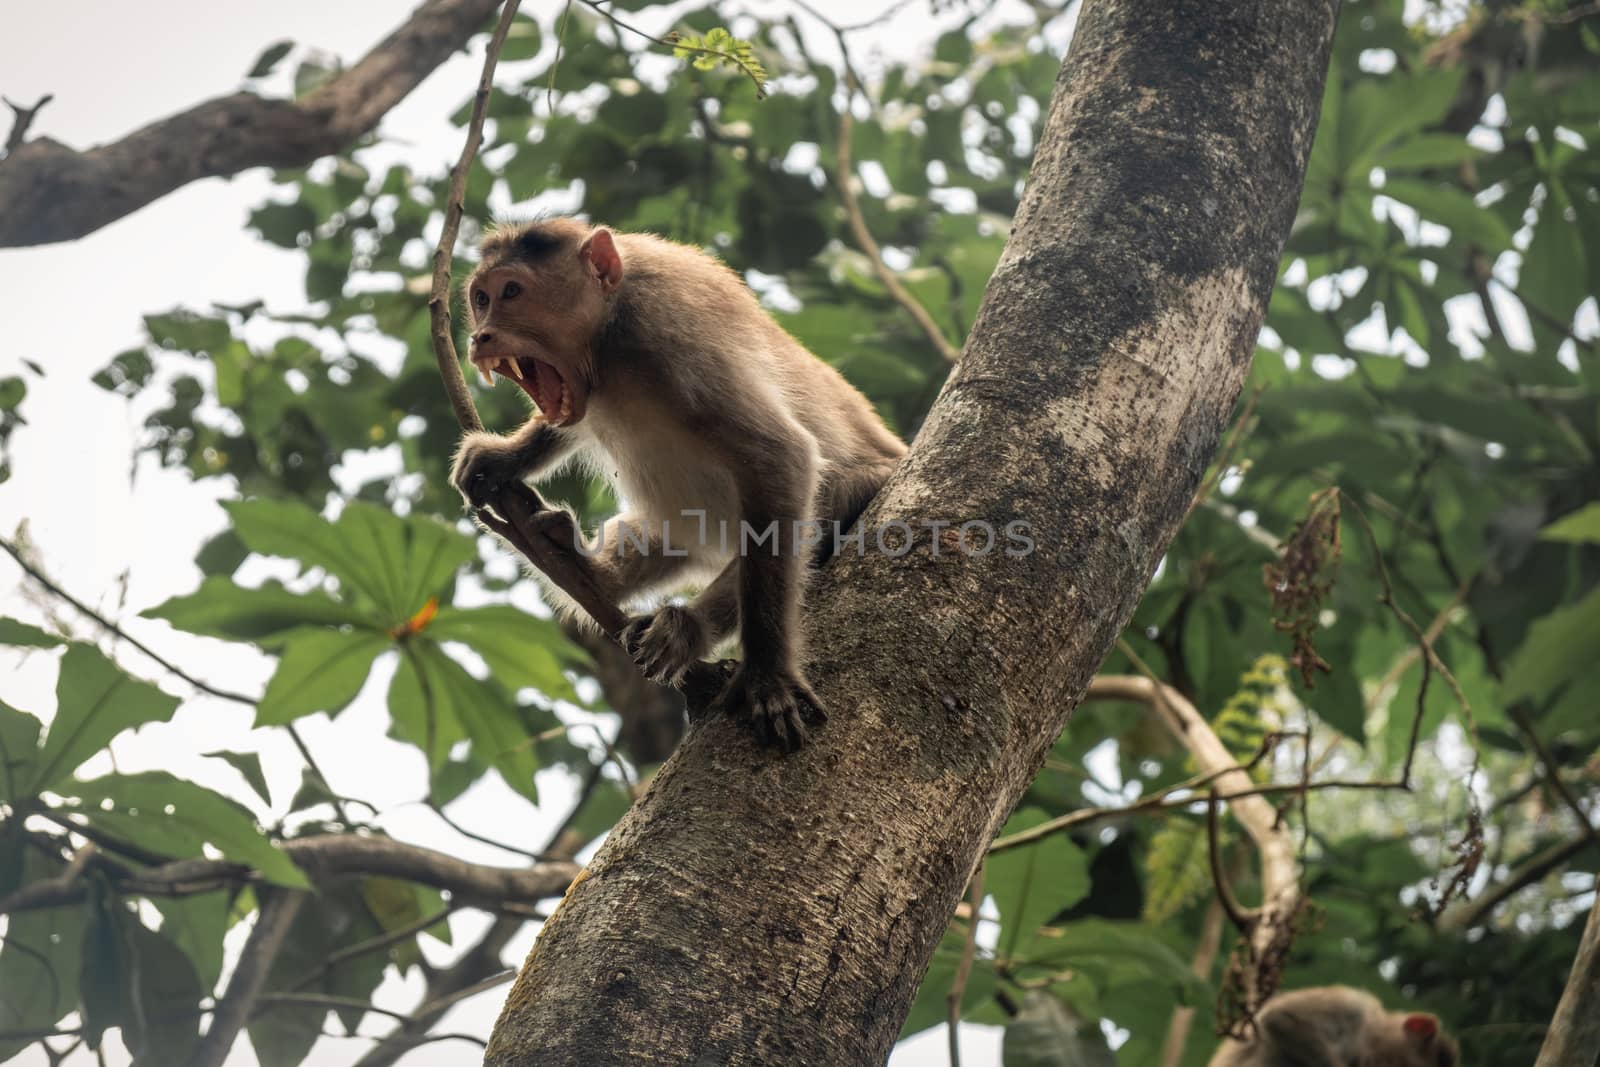 Low Angle View Of Monkey With Mouth Open On Tree